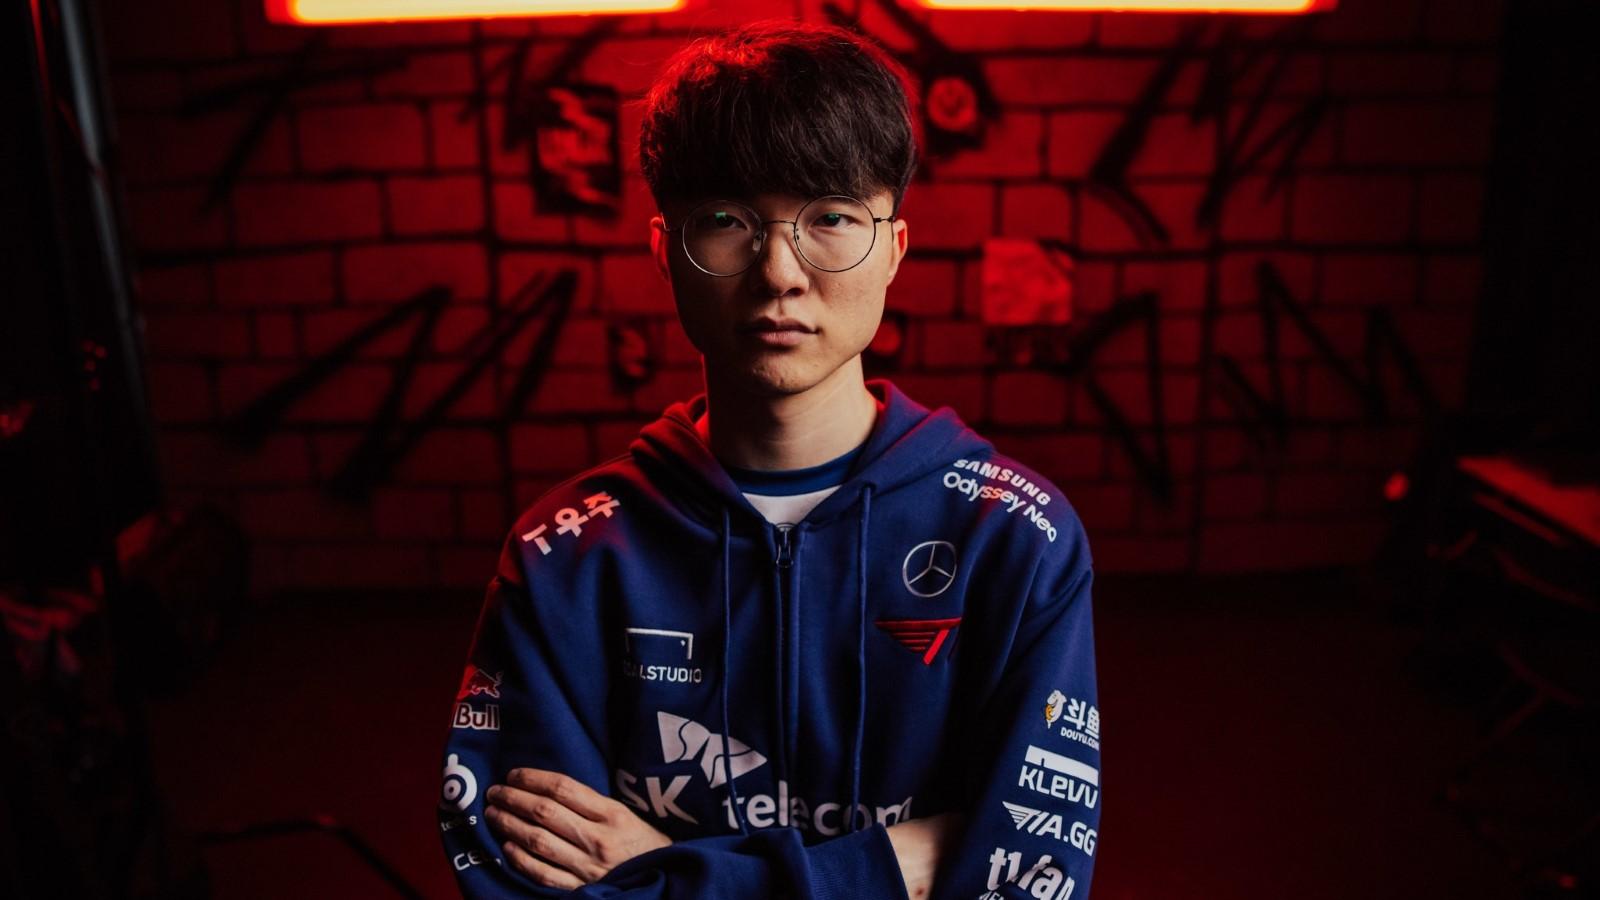 T1 Faker reveals an arm injury is affecting his ability to play - Dexerto